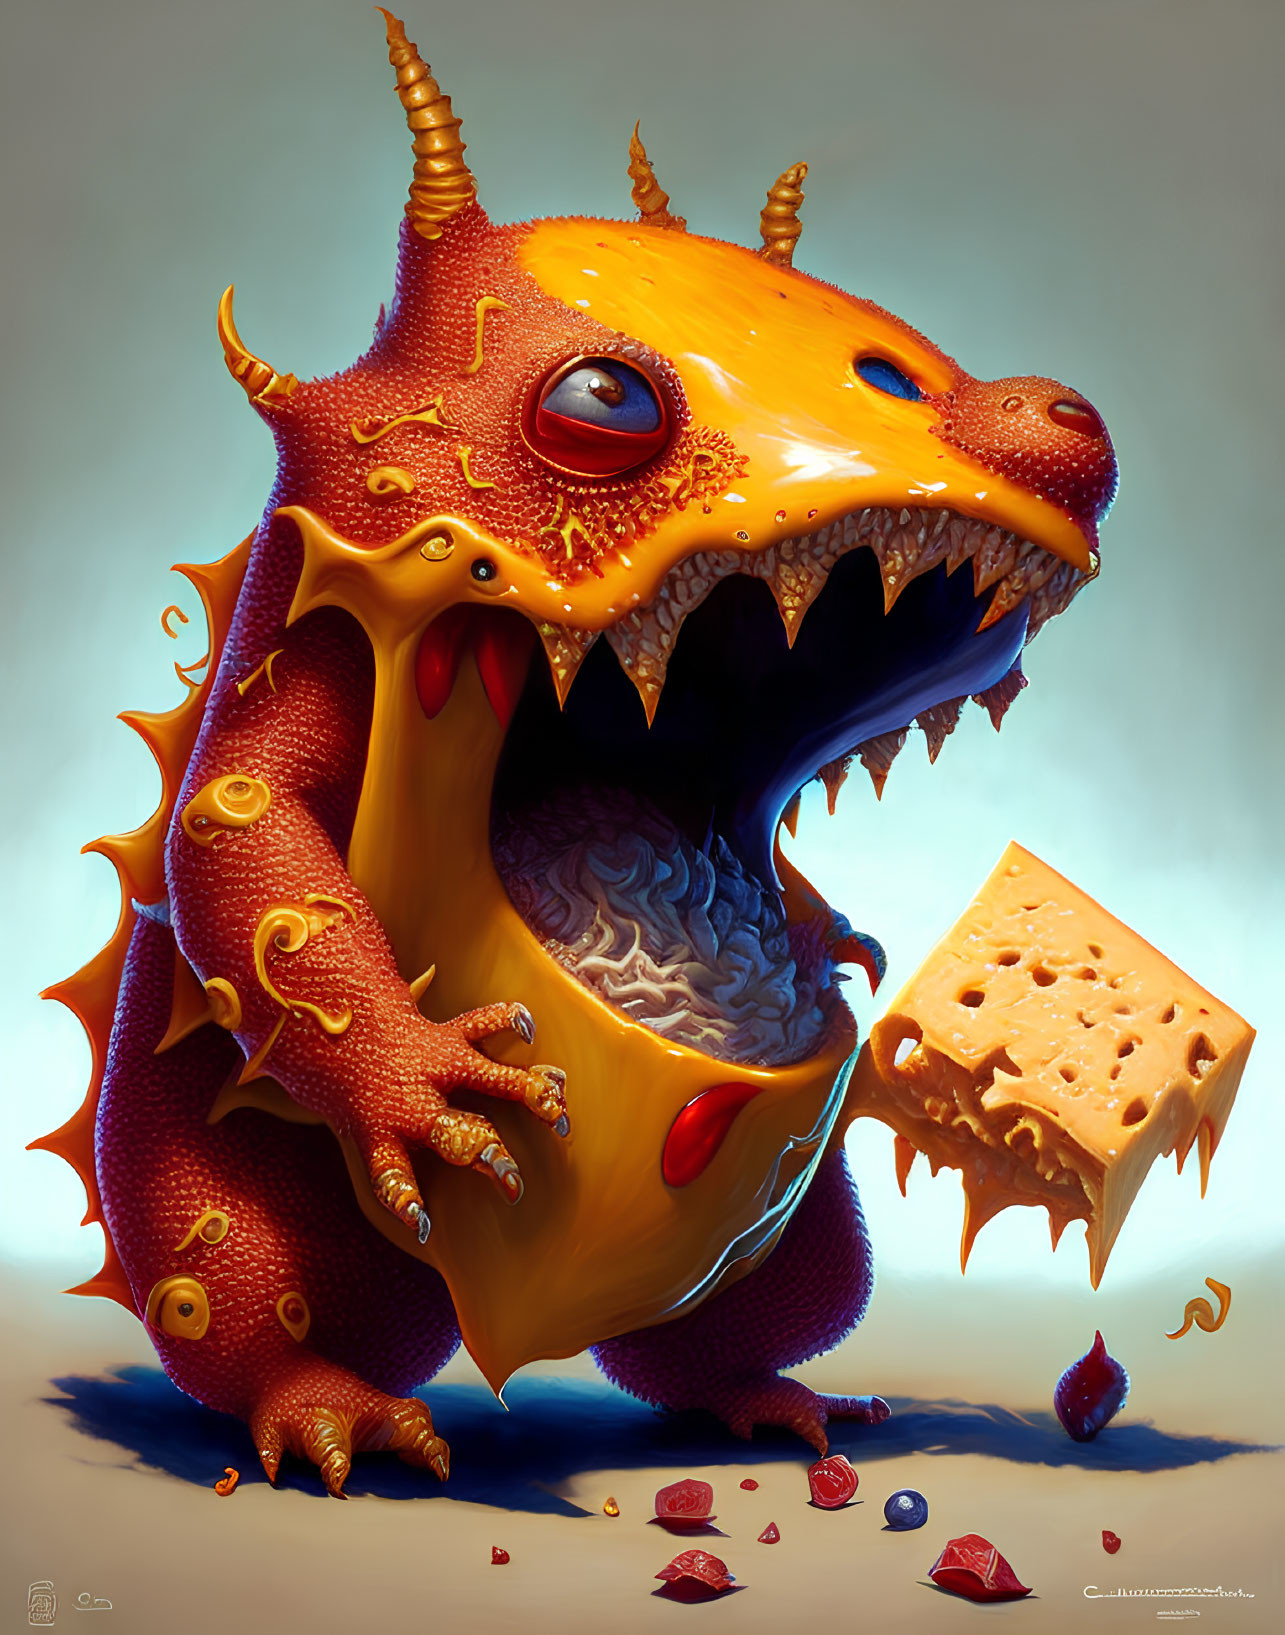 Whimsical orange monster with horns and cheese cube illustration